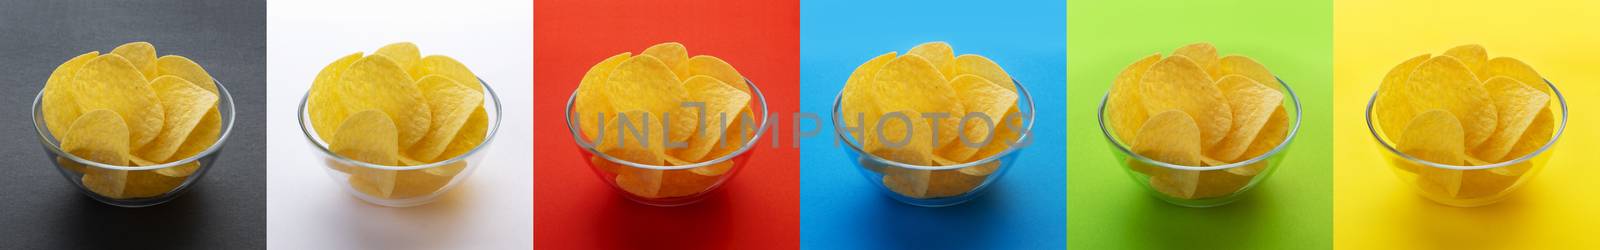 Potato chips in bowl isolated on different backgrounds, collection by xamtiw